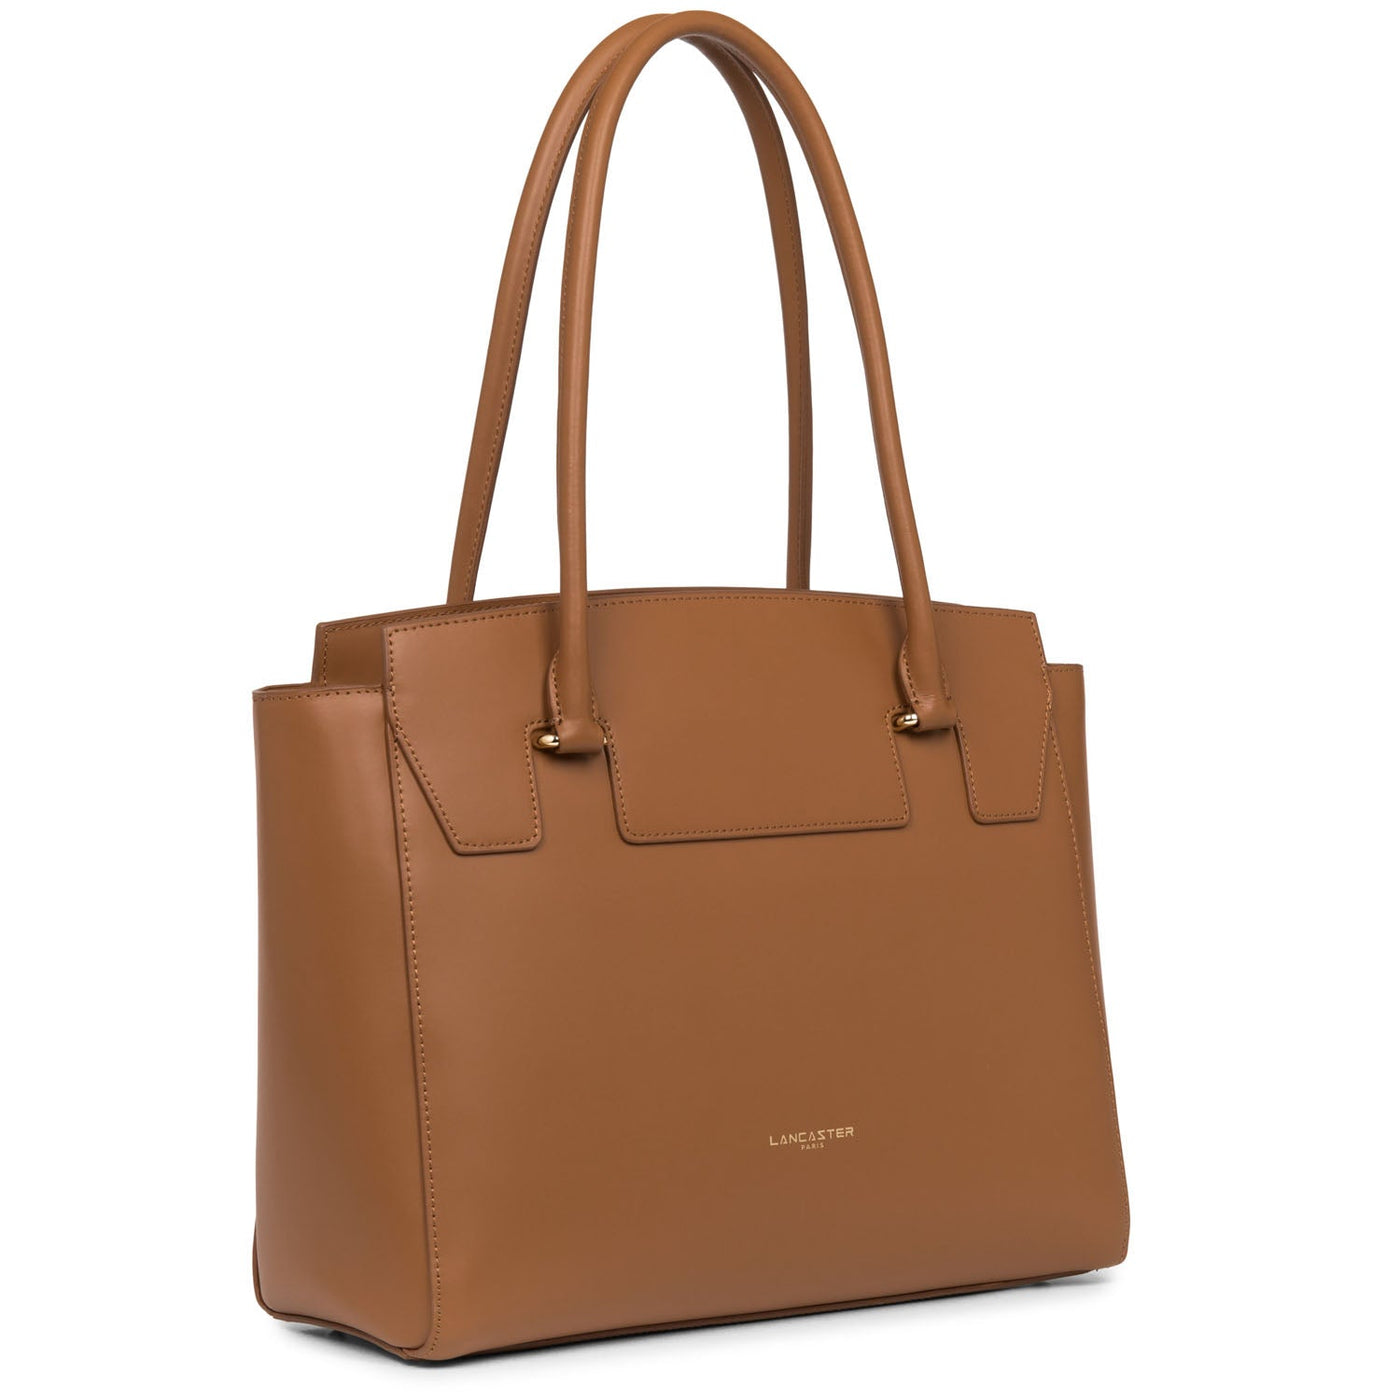 tote bag - smooth or #couleur_camel